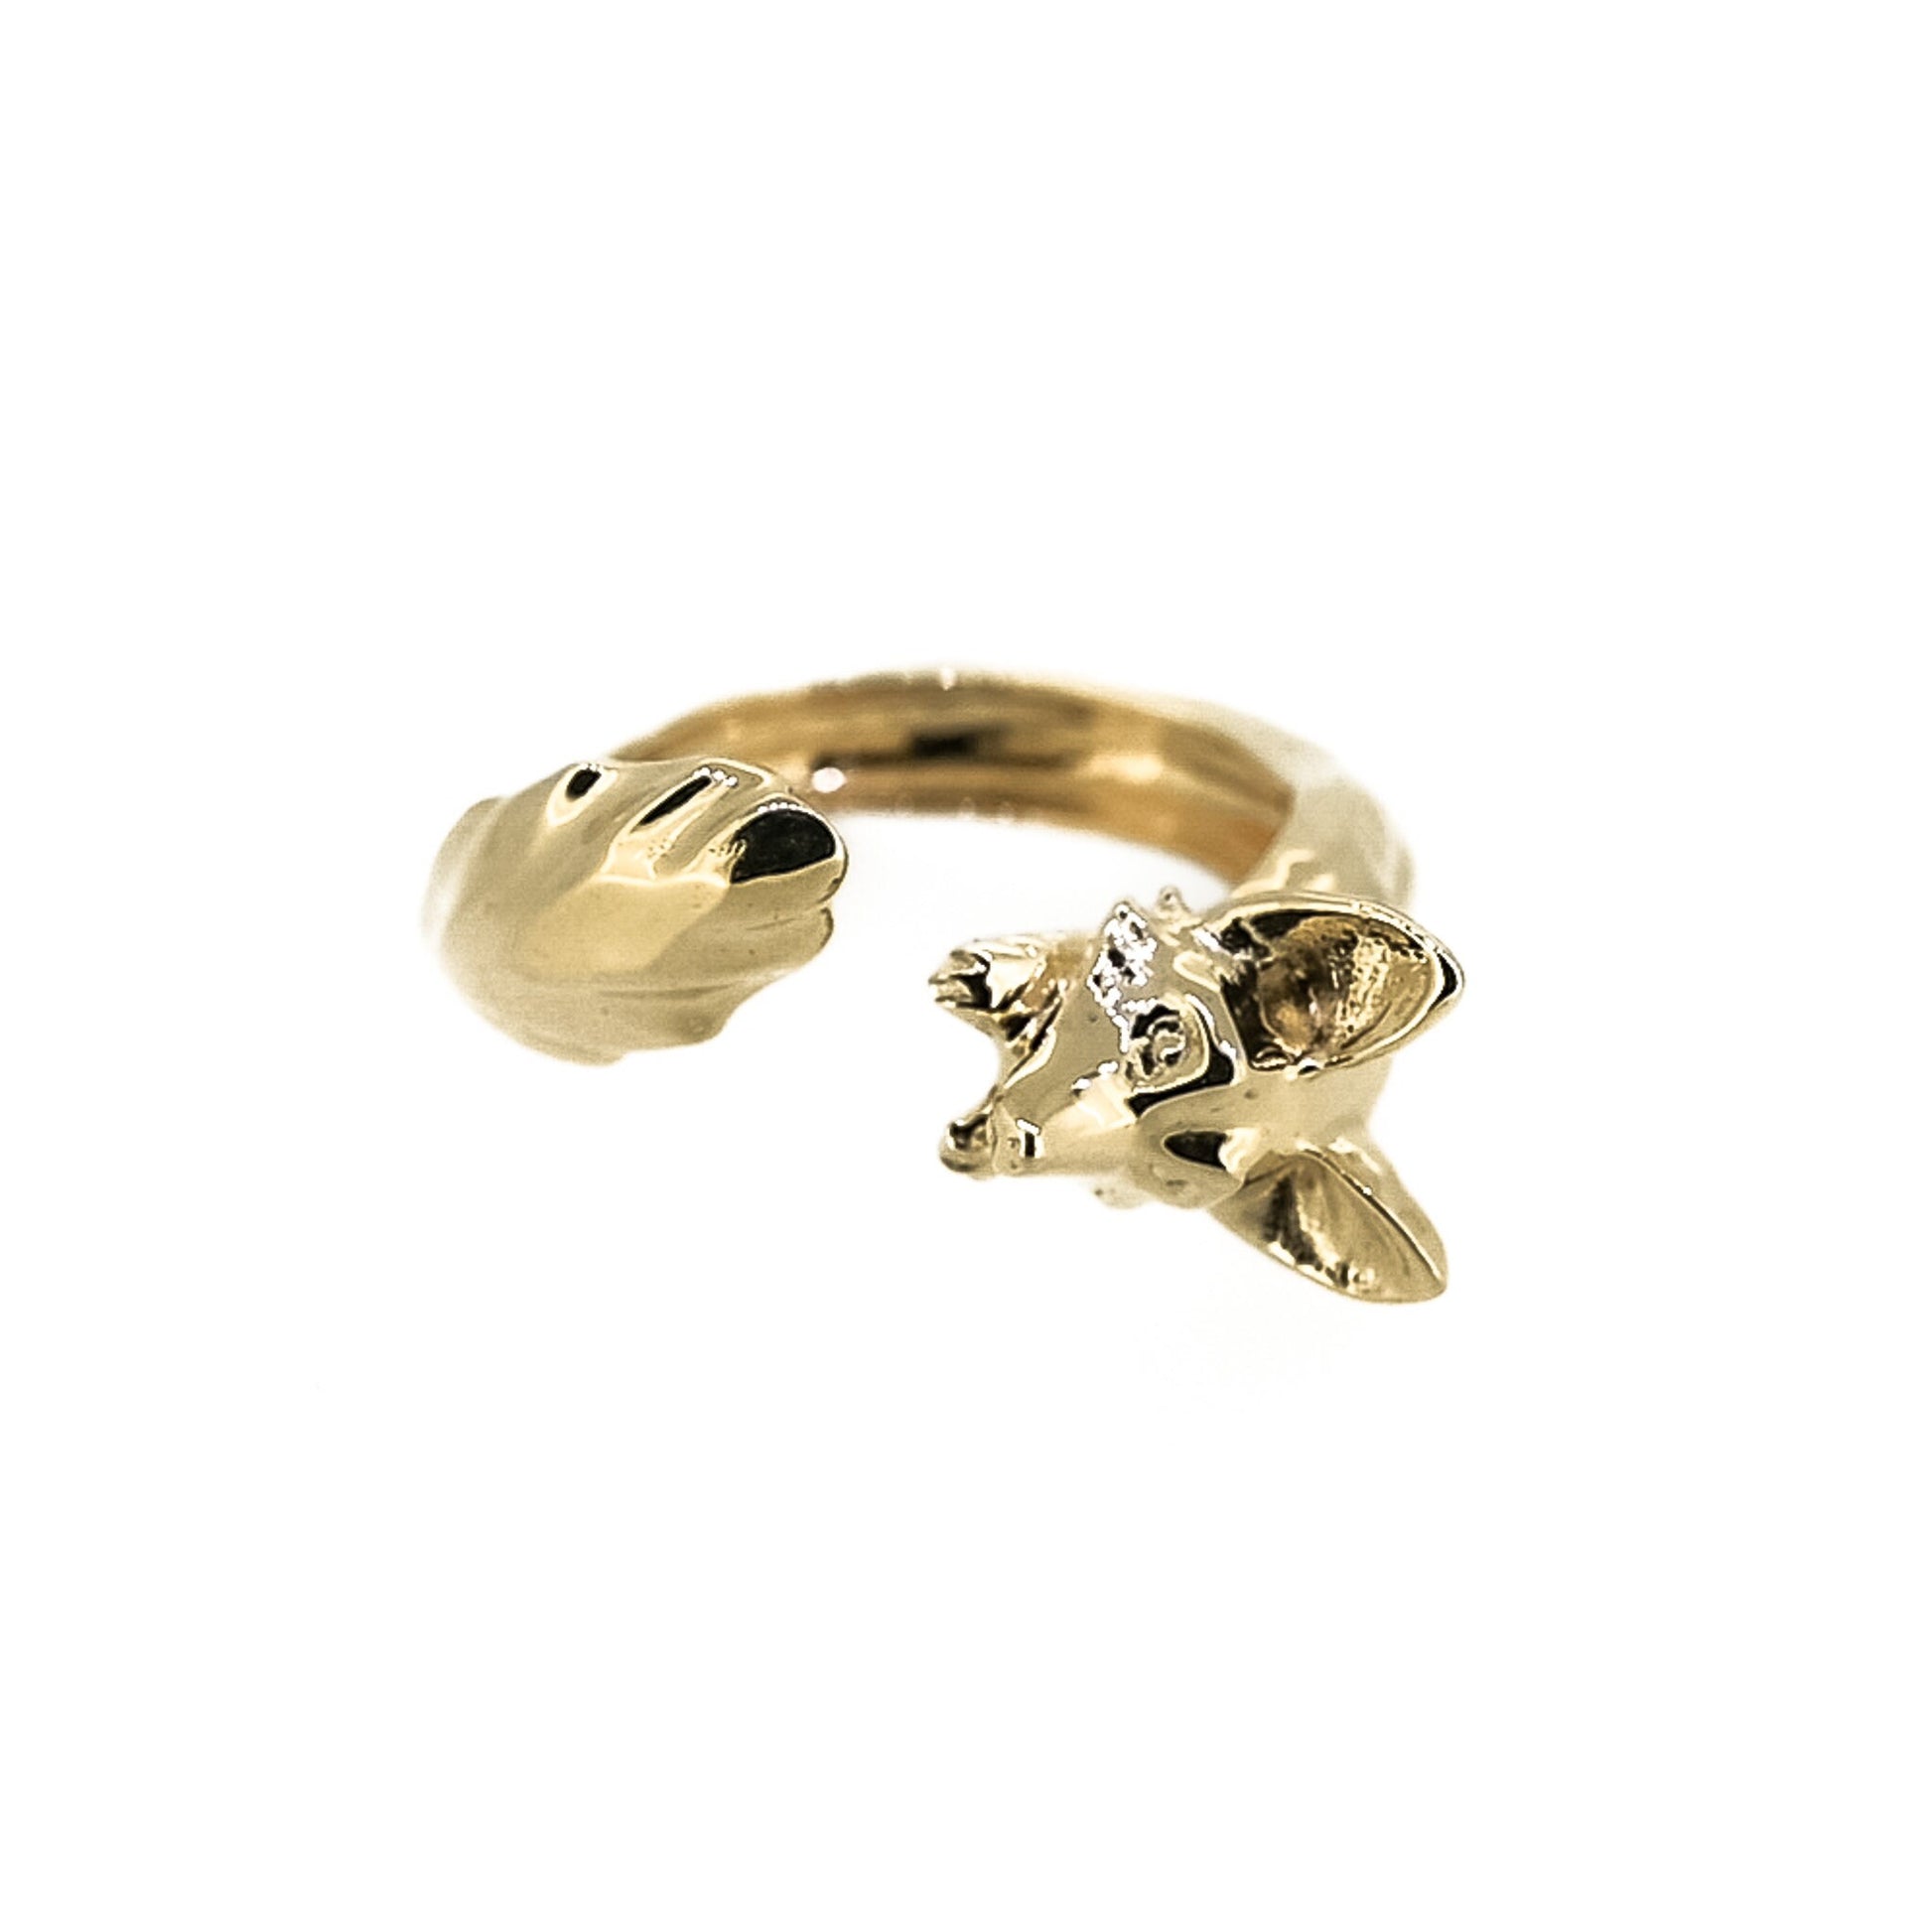 Fox Adjustable Ring in Solid Silver, Vermeil, and 18K Gold Plate